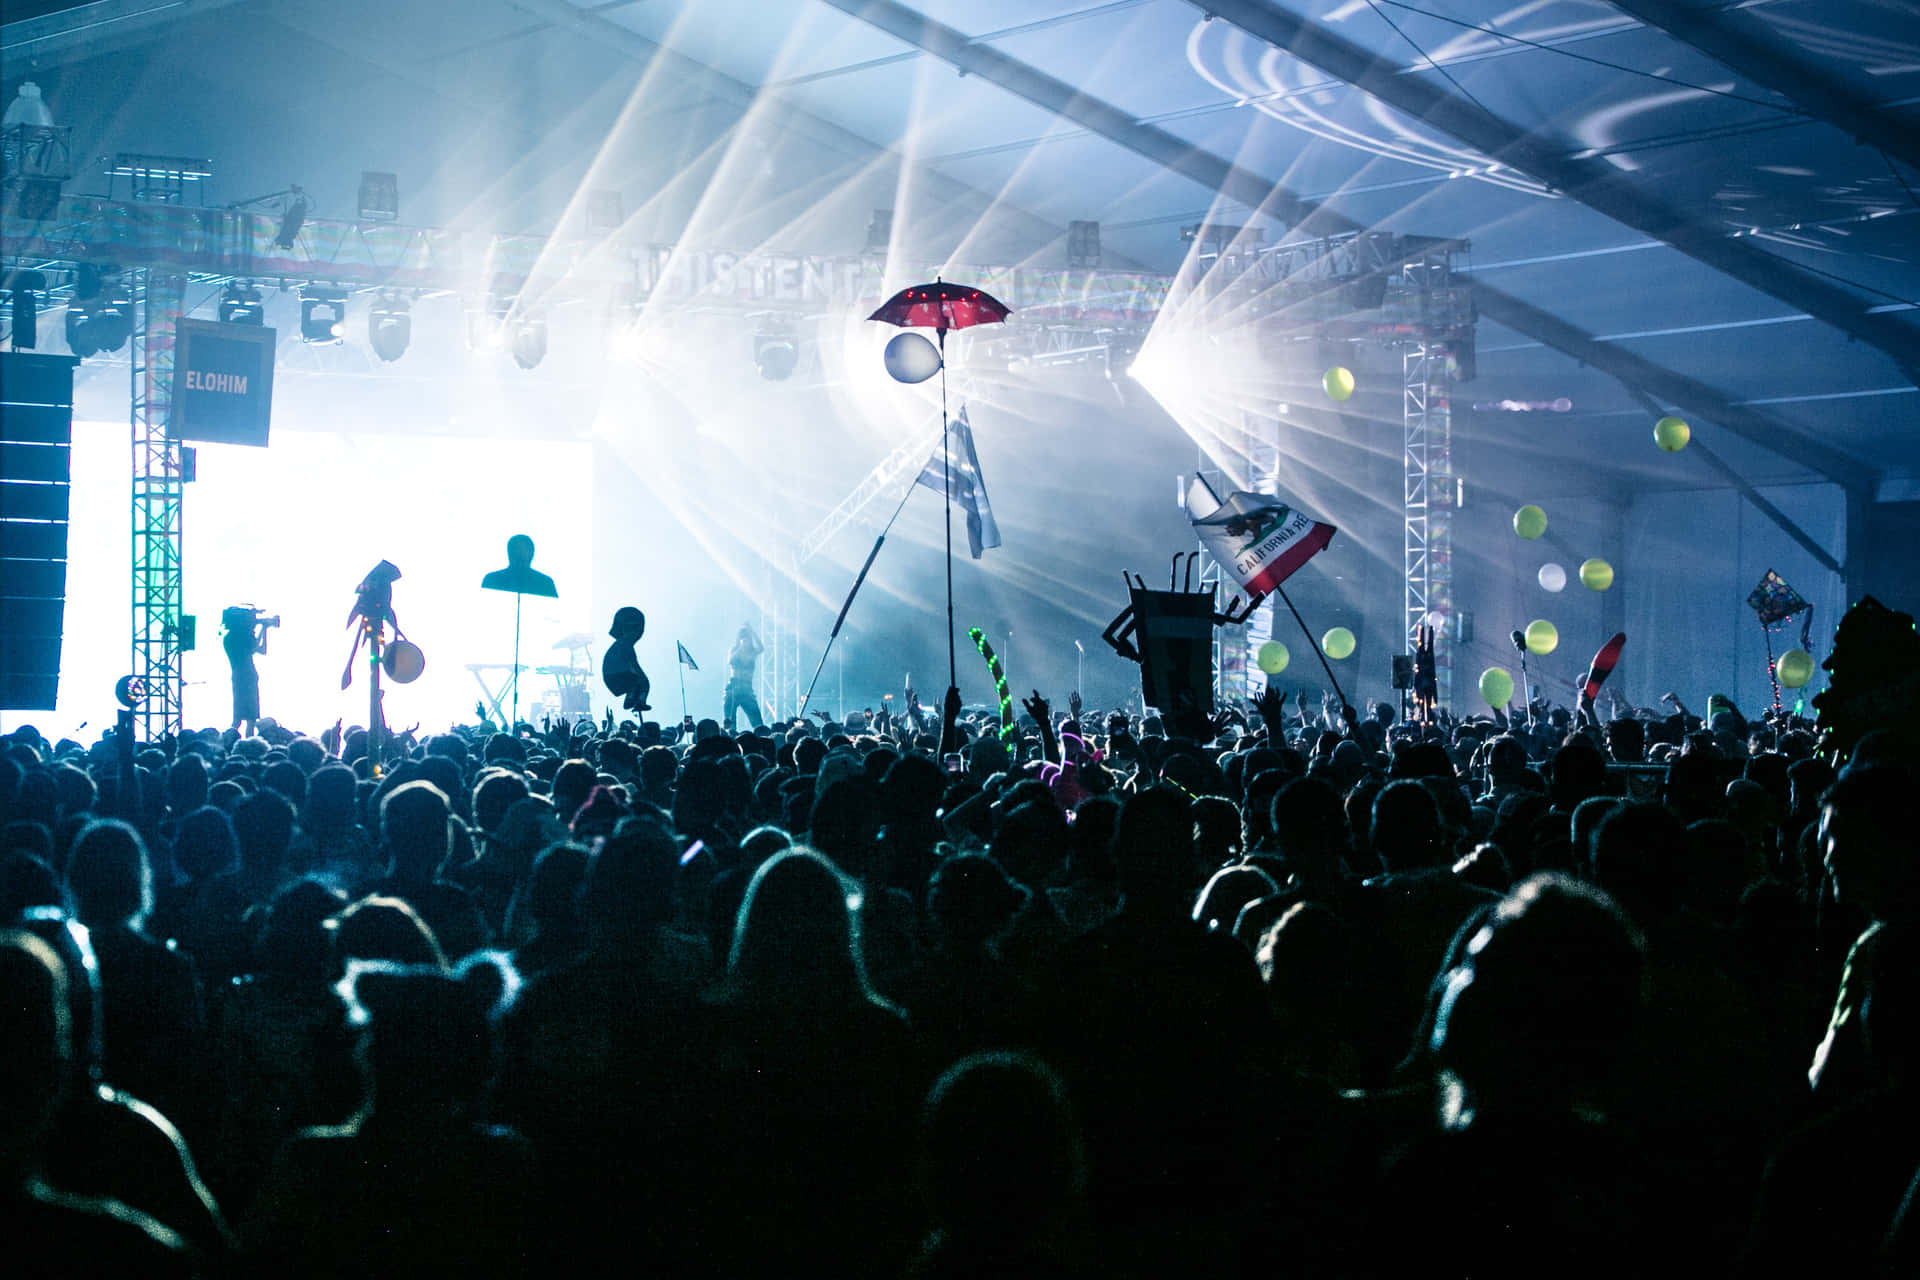 Energetic Crowd at Music Festival Wallpaper